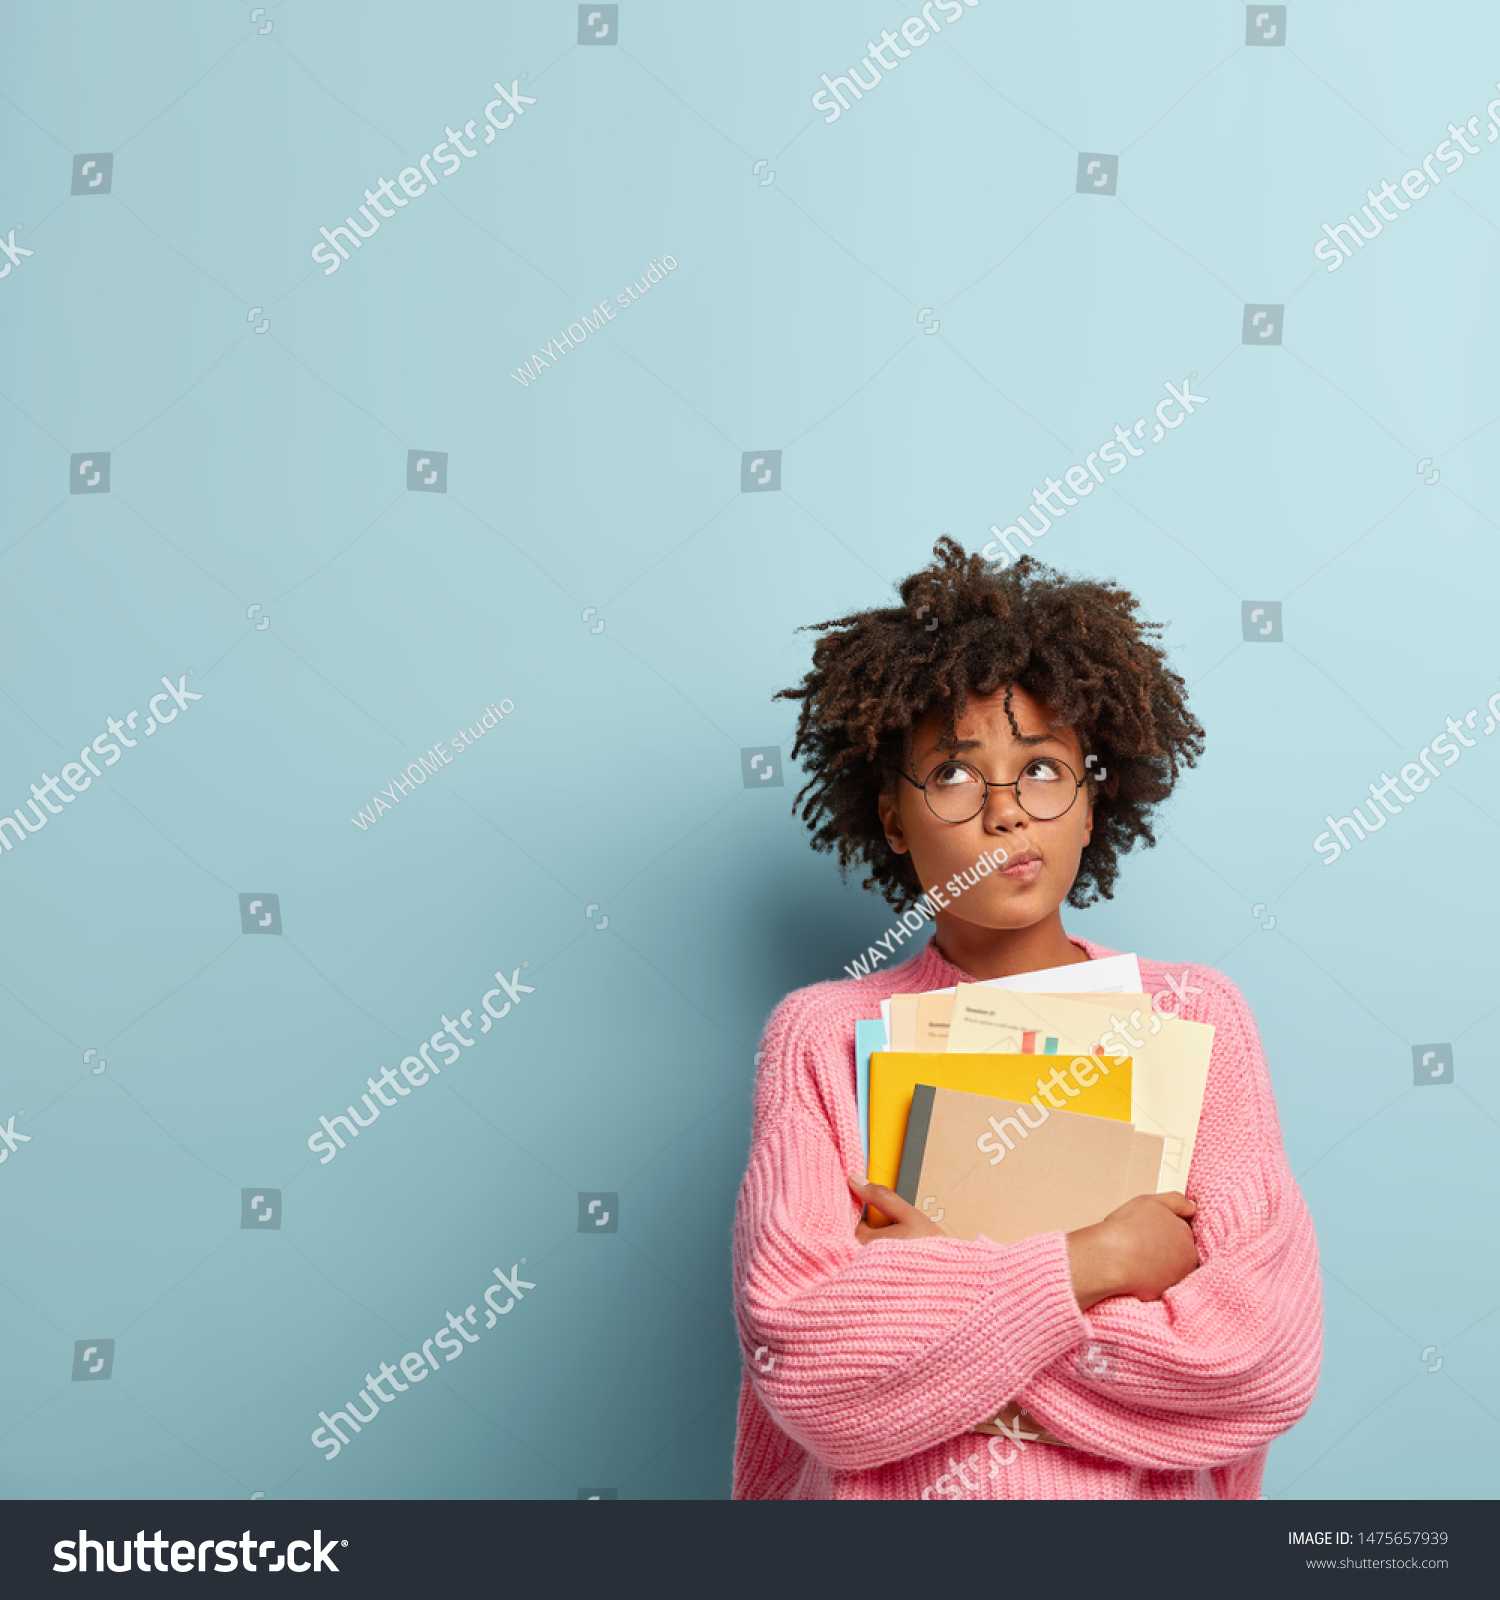 Pensive dark skinned college student holds papers and textbooks, purses lips and focused upwards, wears rosy knitted sweater, stands against blue background with copy space for your advertisement #1475657939